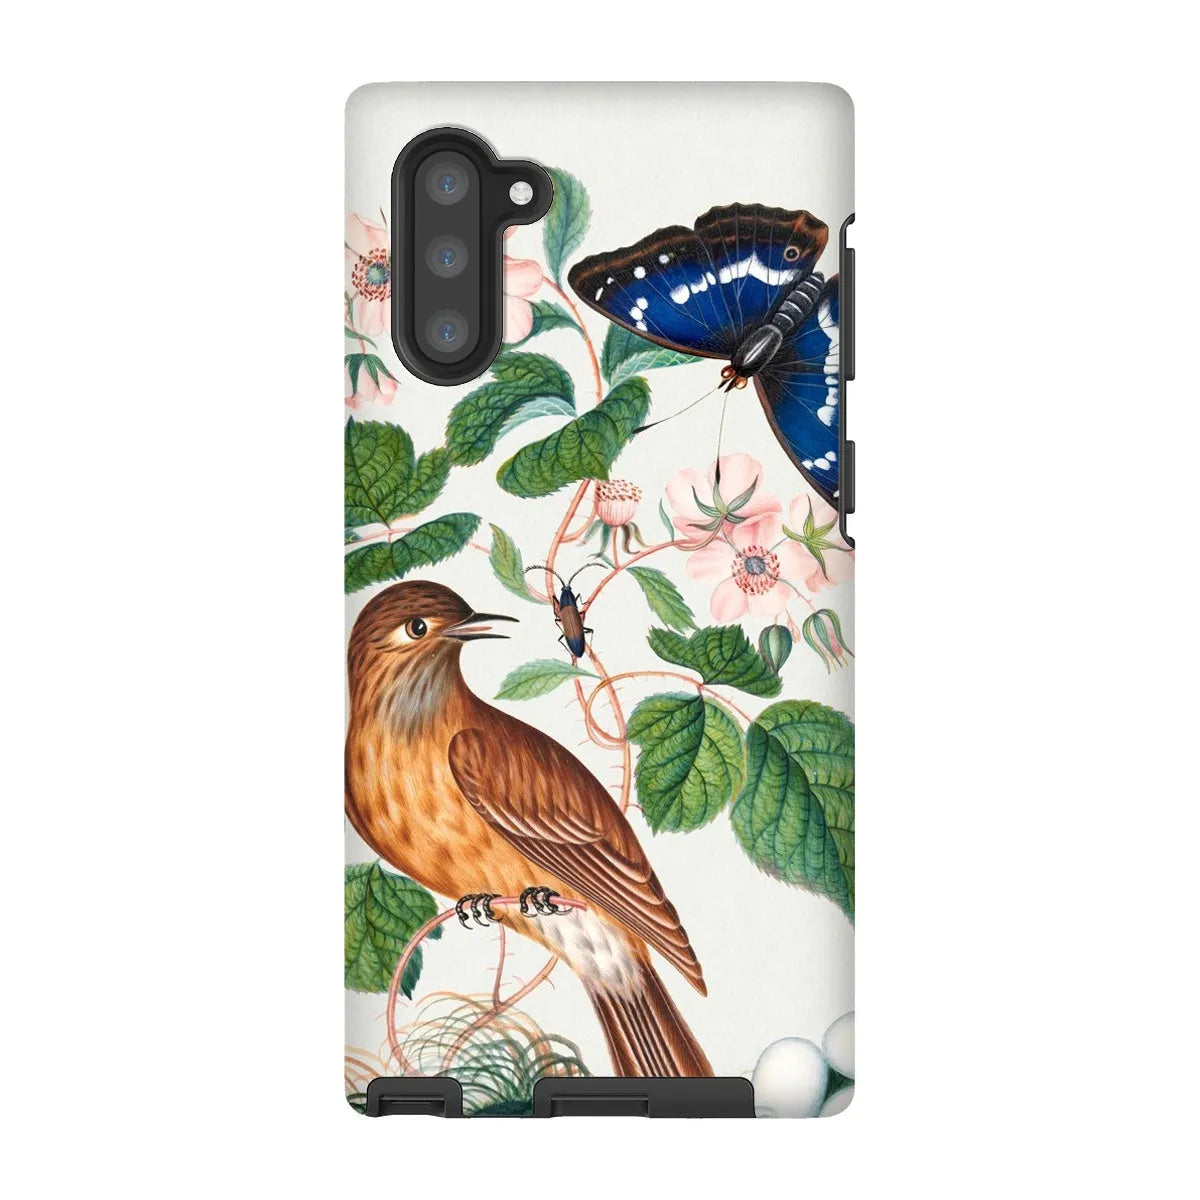 Flycatcher Emperor And Beetle - Art Phone Case - James Bolton - Samsung Galaxy Note 10 / Matte - Mobile Phone Cases